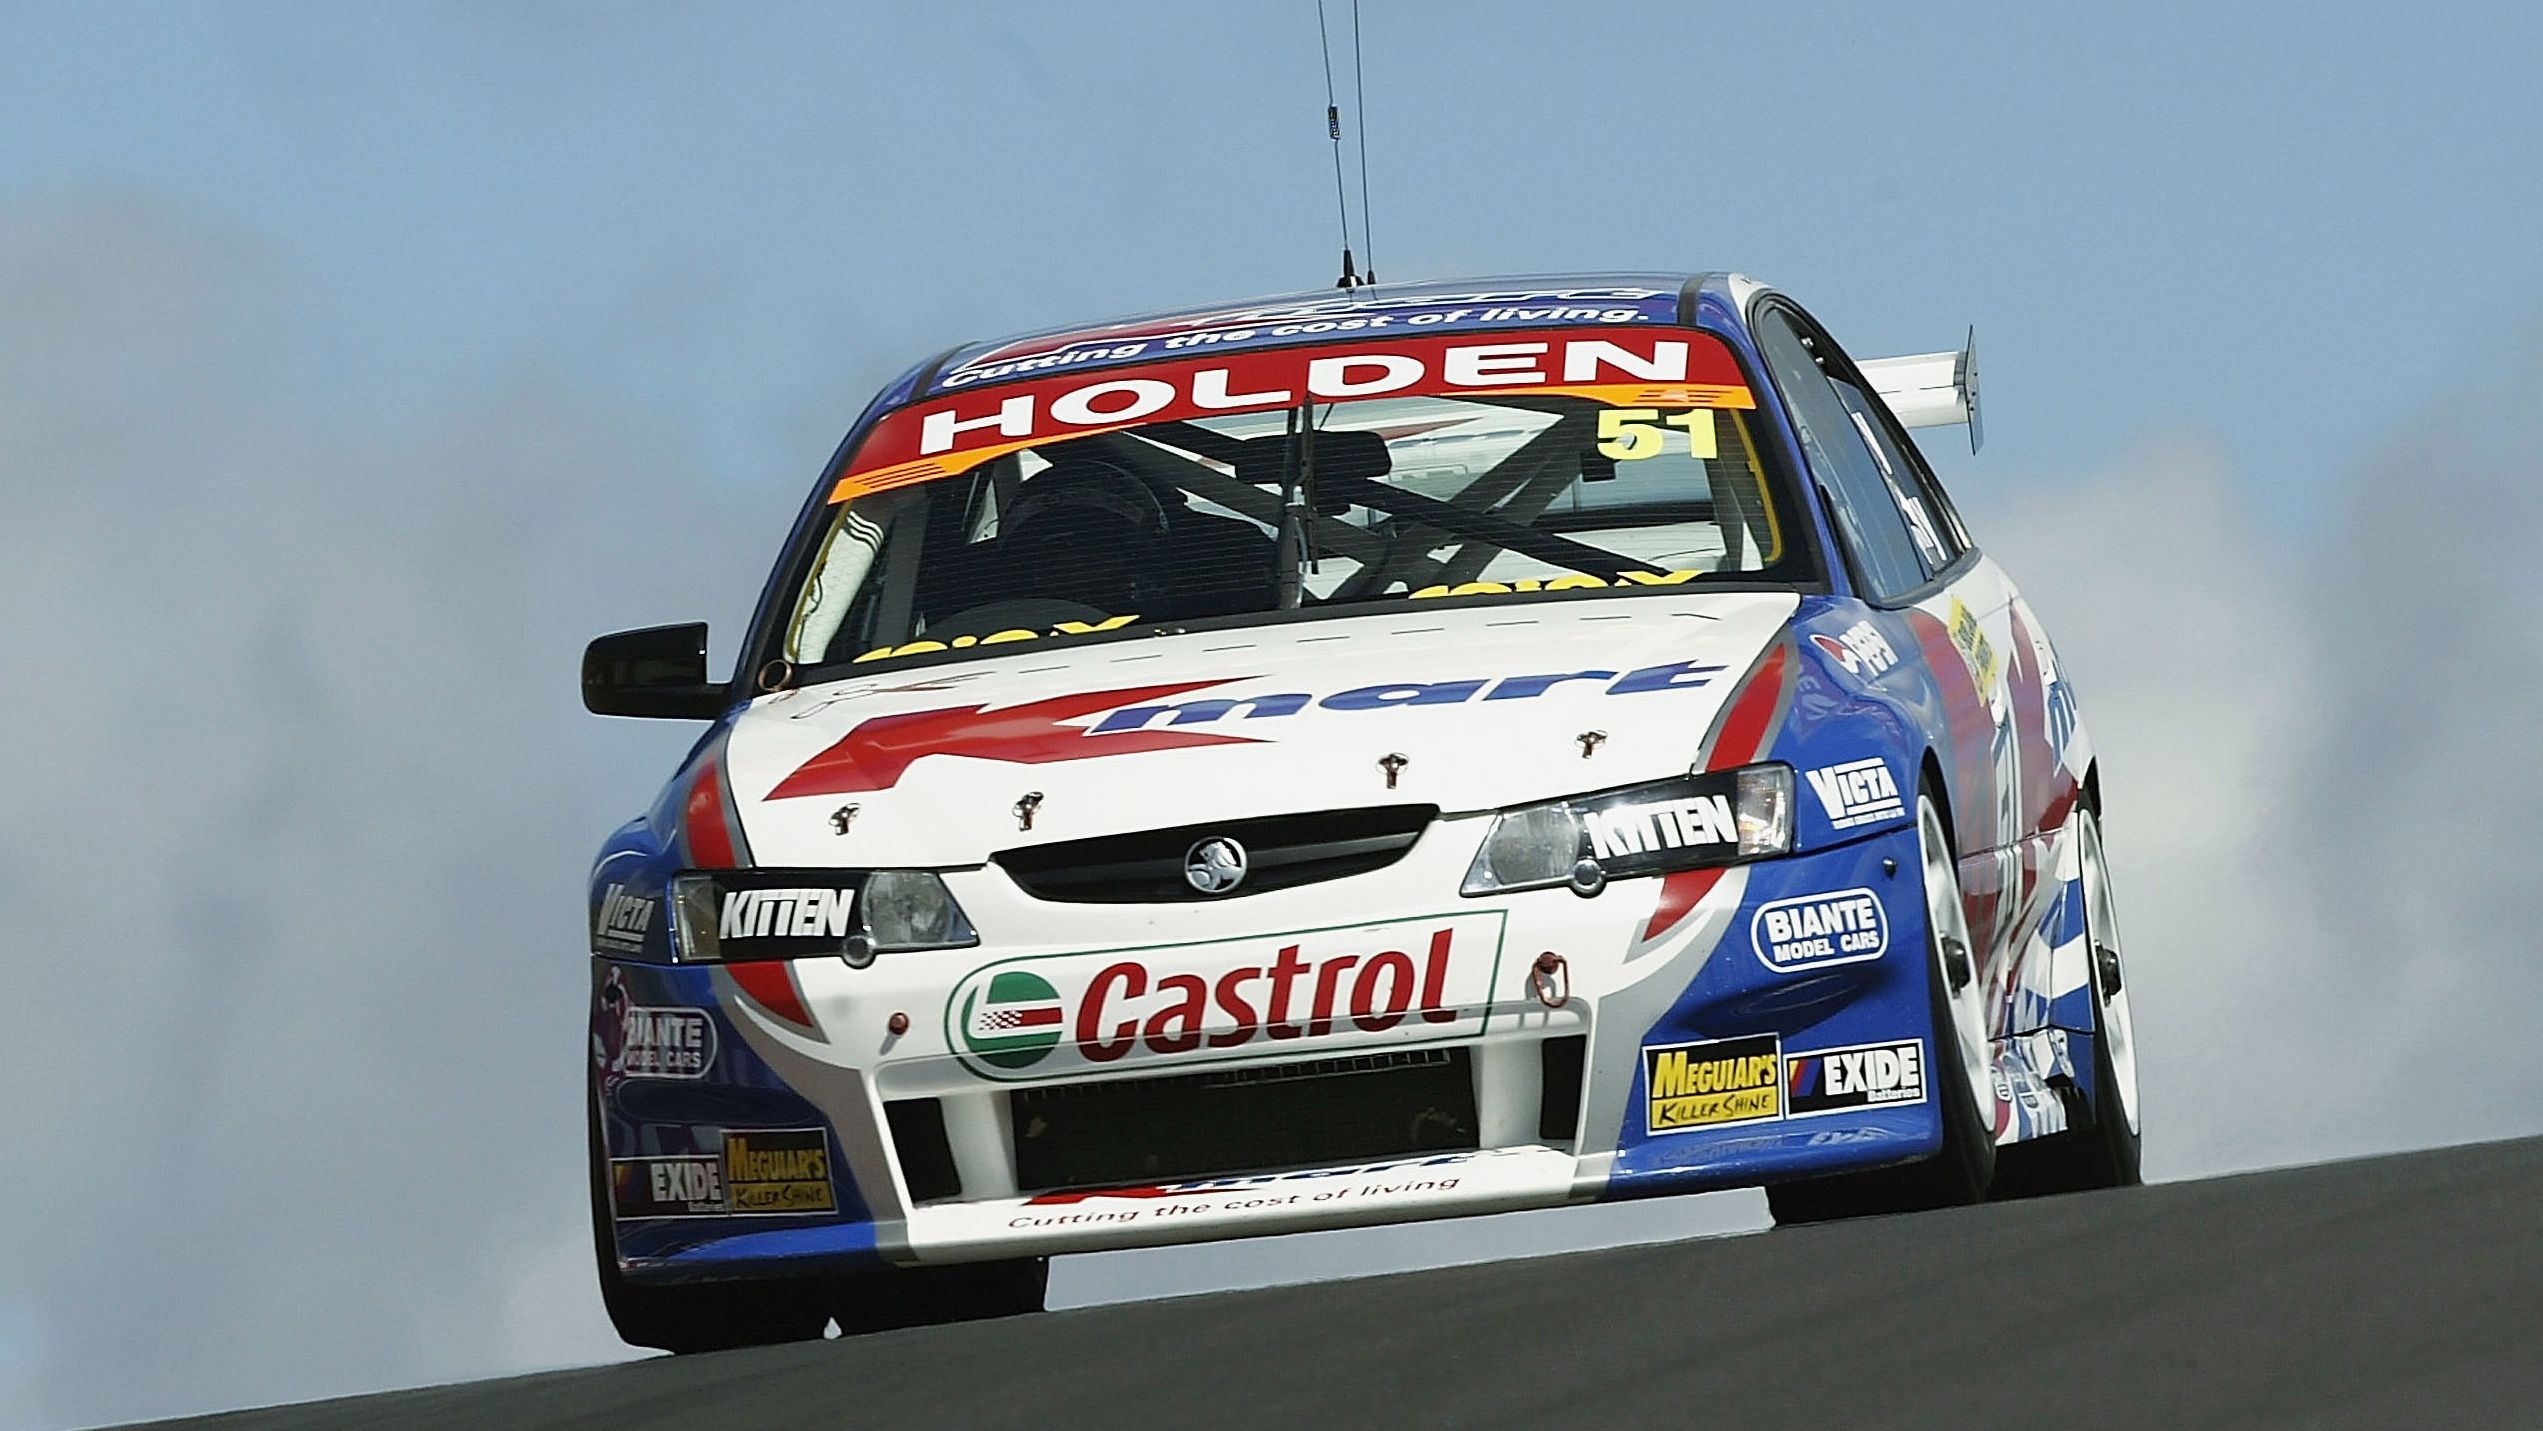 The Holden Commodore that Greg Murphy and Rick Kelly drove to victory at the Bathurst 1000 in 2003.